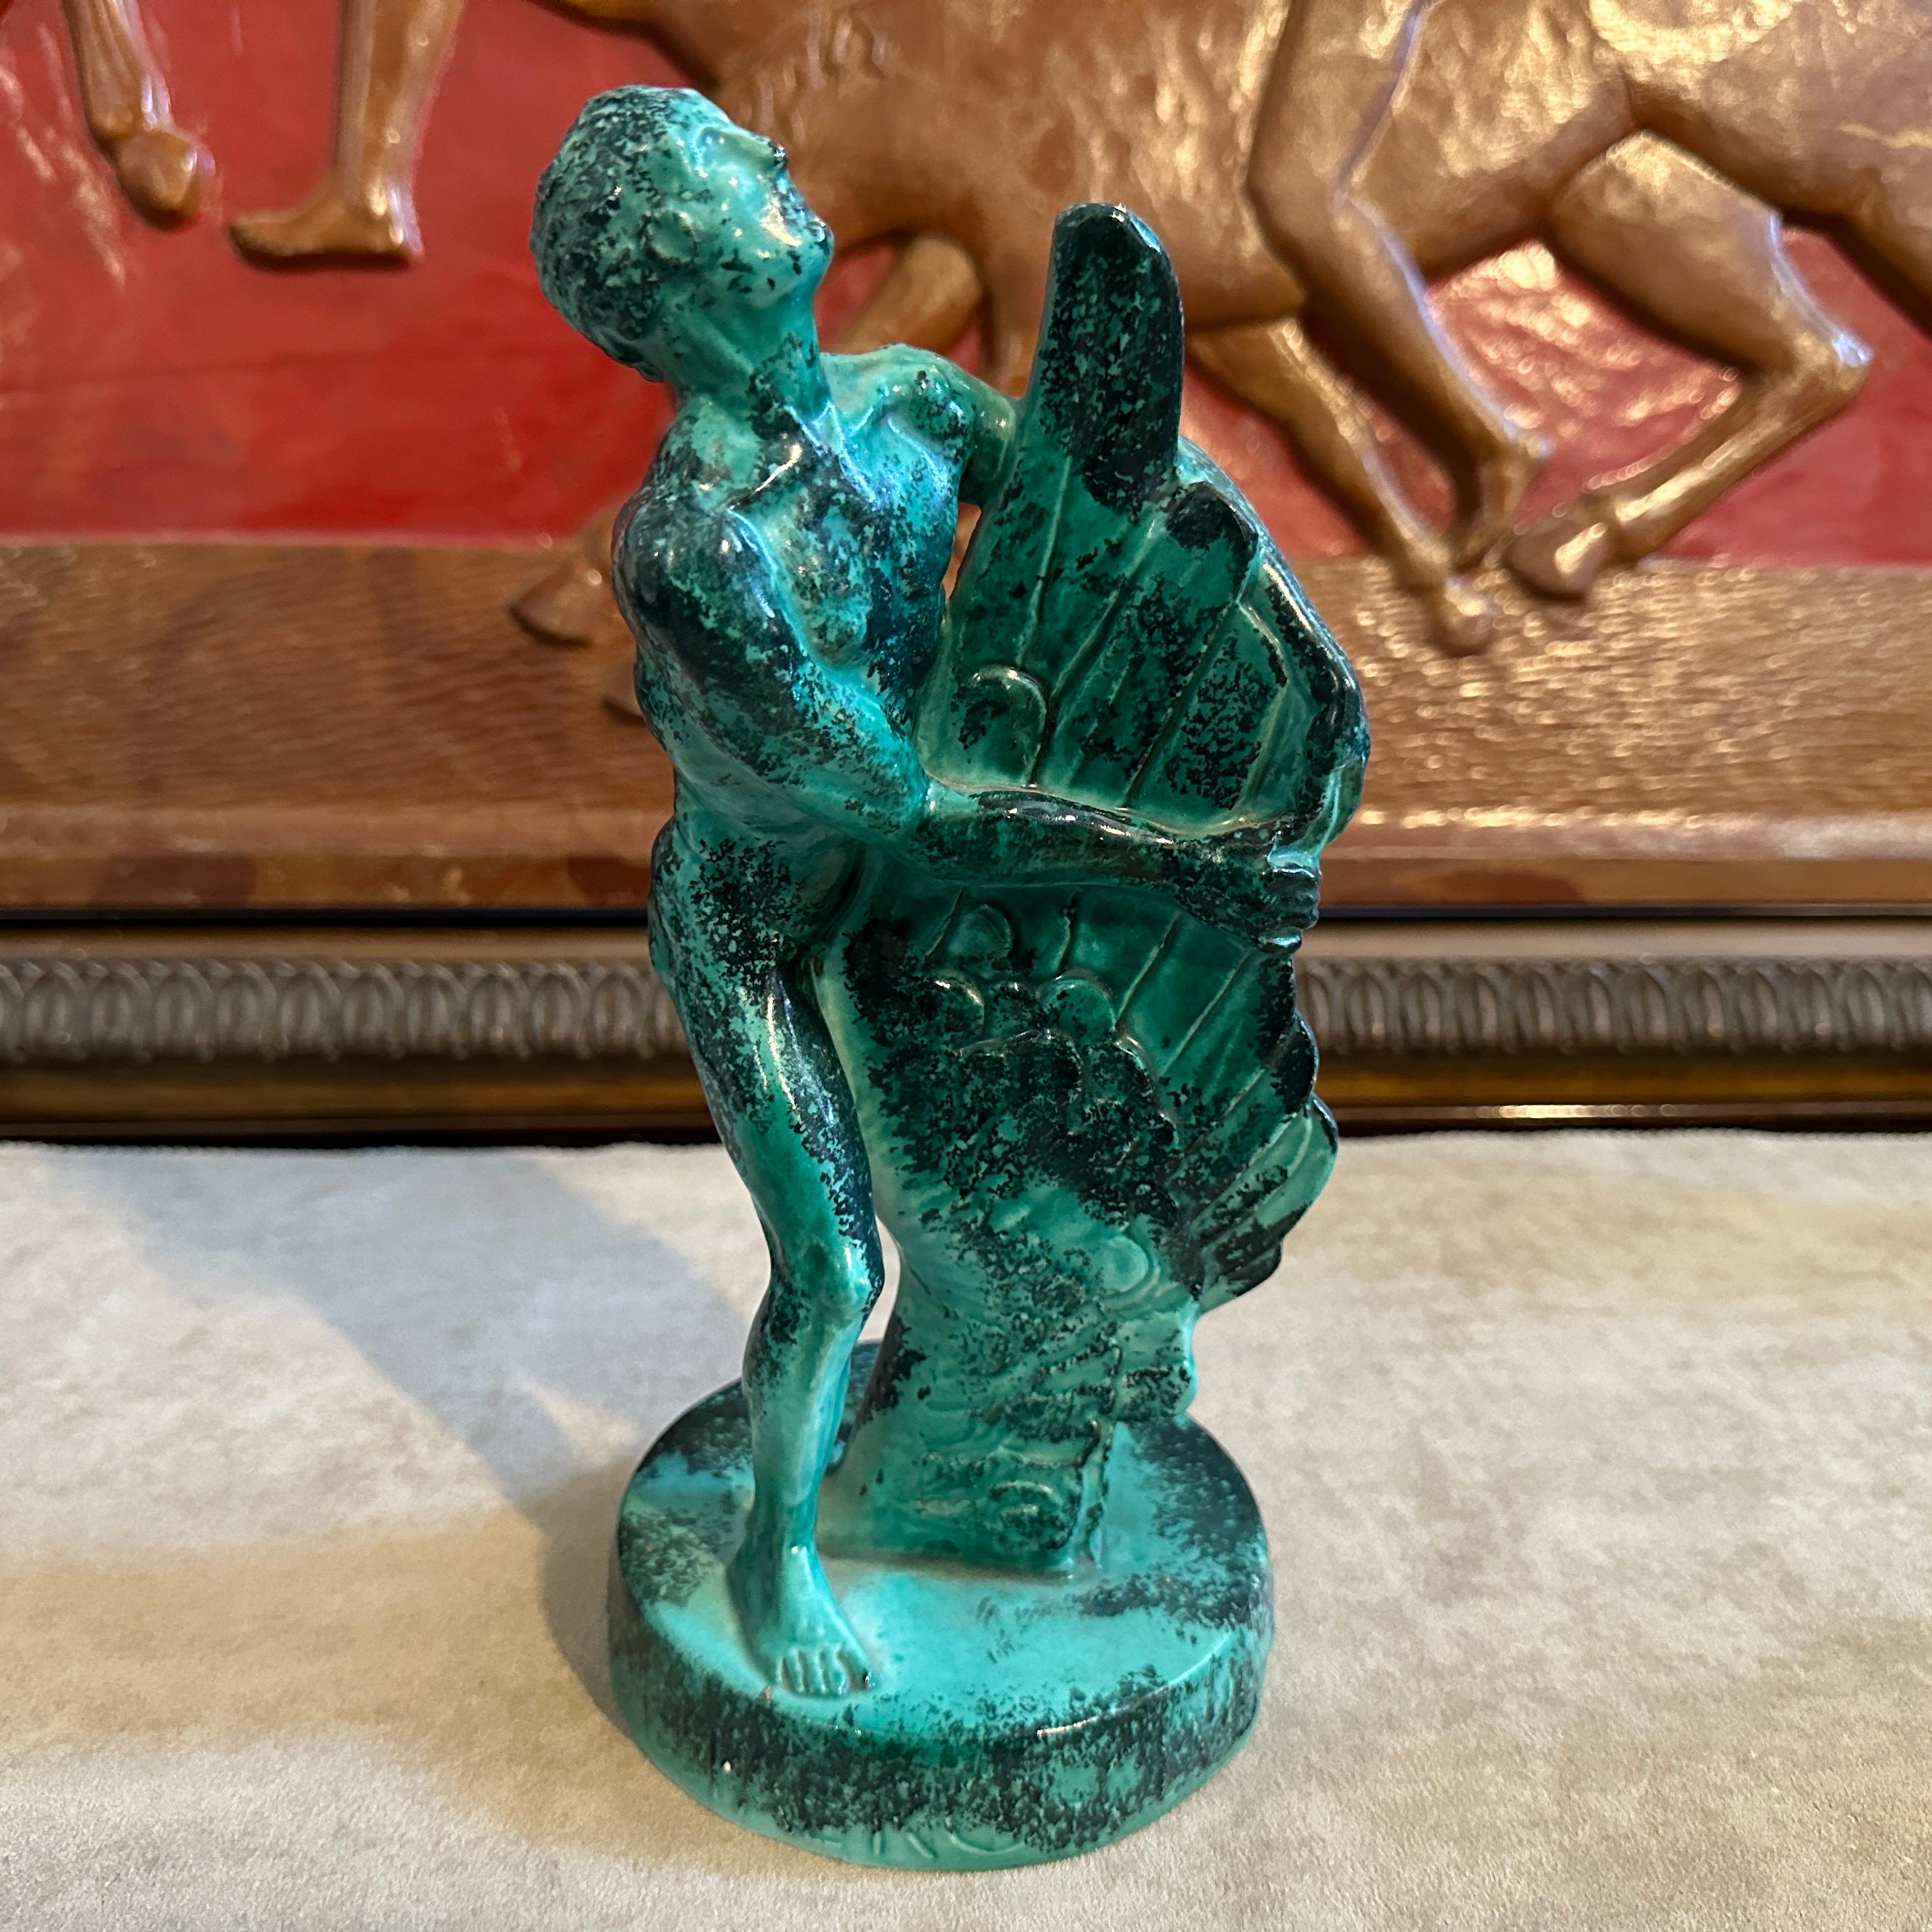 It's a green ceramic figure dated 8-9-1951, especially made for an aviation rally of  Aeroclub Vicenza. It's in perfect condition and depicts a stylized man holding a Wing. The figure has marked in relief on the base the date and Avioraduno Aeroclub